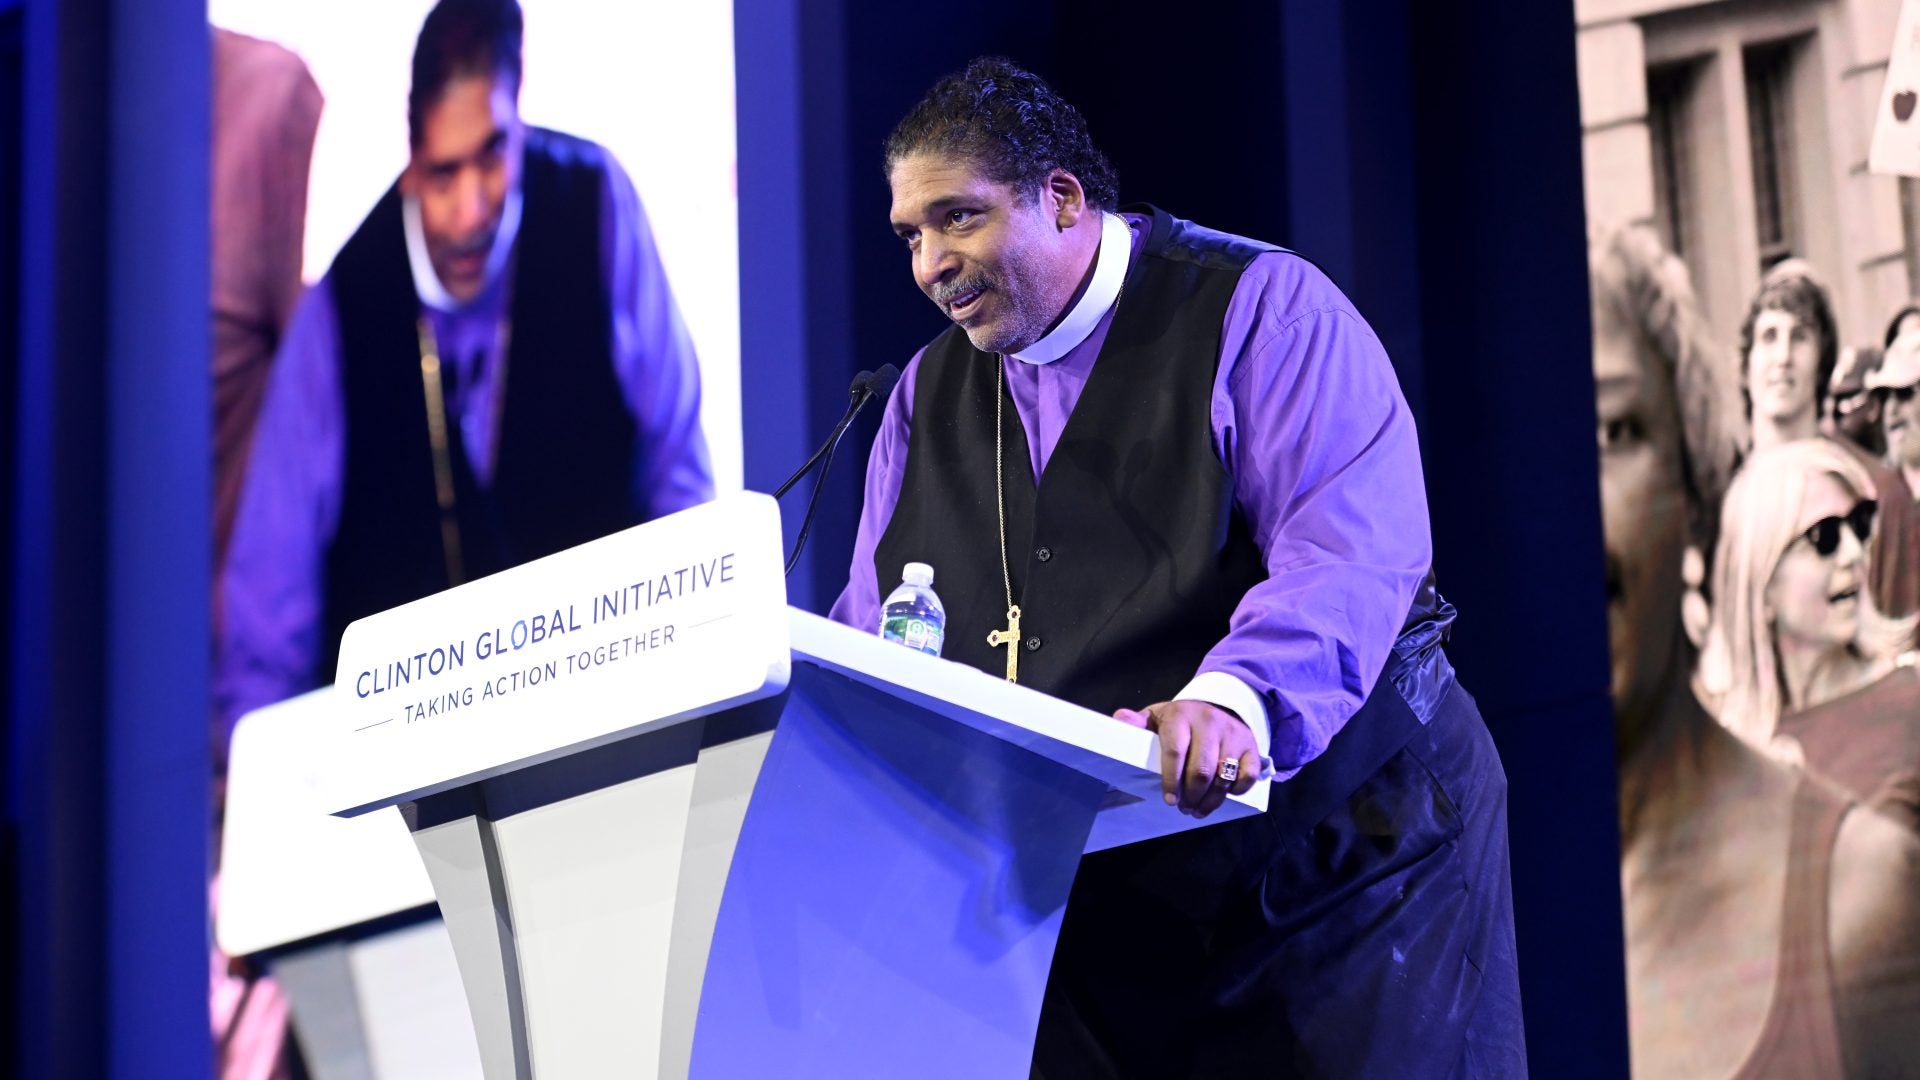 Movie Theater Employee Reportedly Called Police On Rev. Dr. William Barber II, Forced His Removal After He Tried To Use Special Chair For Medical Condition